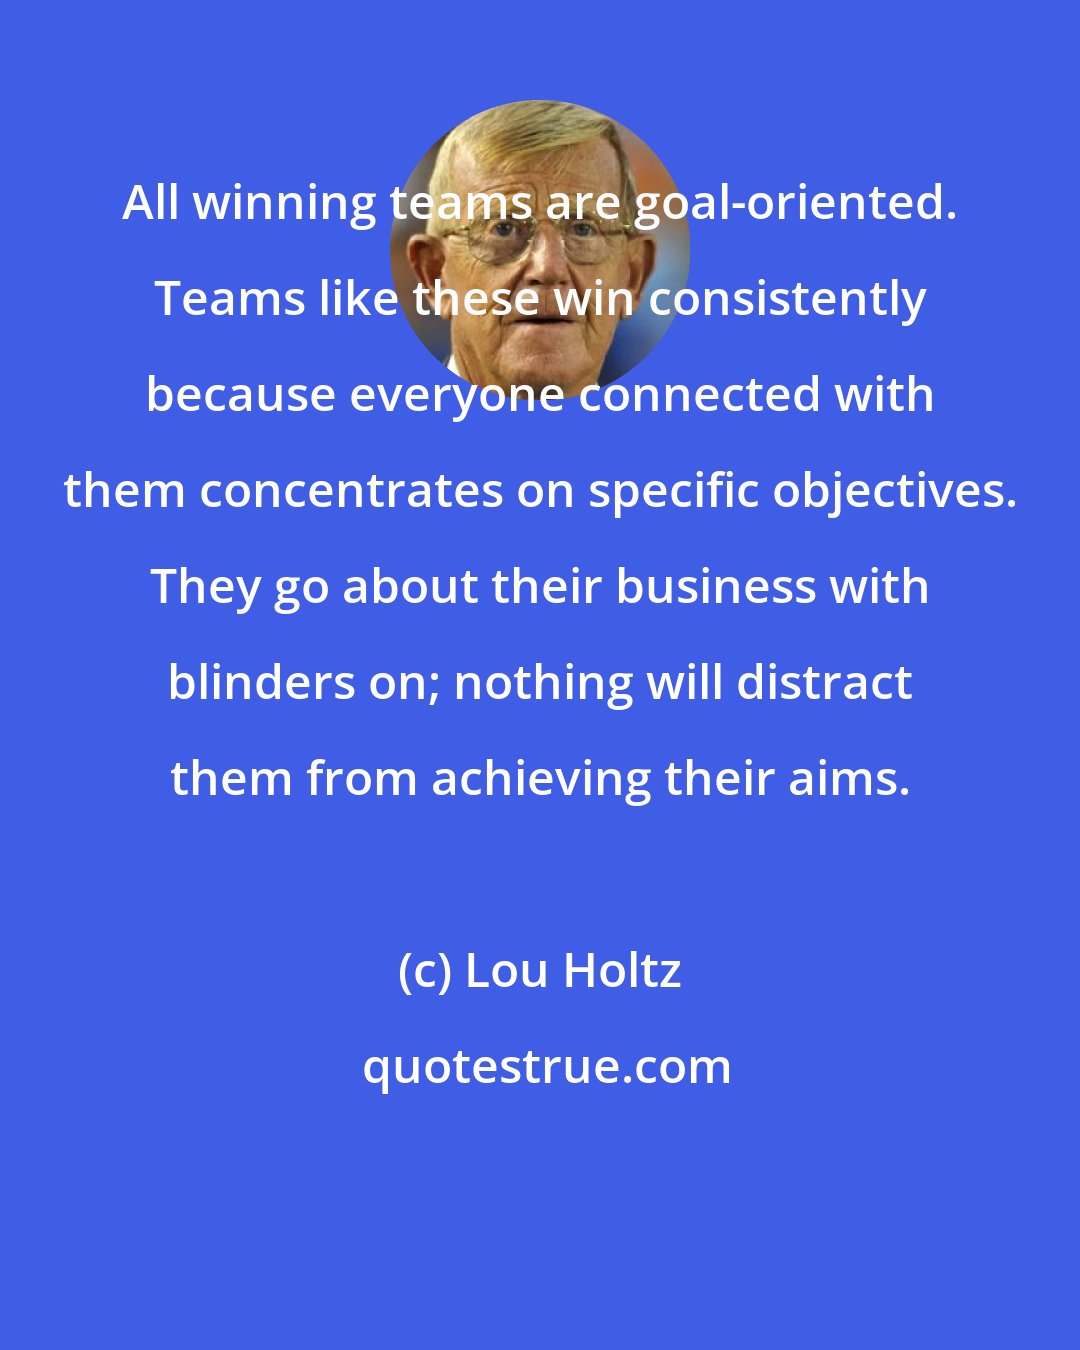 Lou Holtz: All winning teams are goal-oriented. Teams like these win consistently because everyone connected with them concentrates on specific objectives. They go about their business with blinders on; nothing will distract them from achieving their aims.